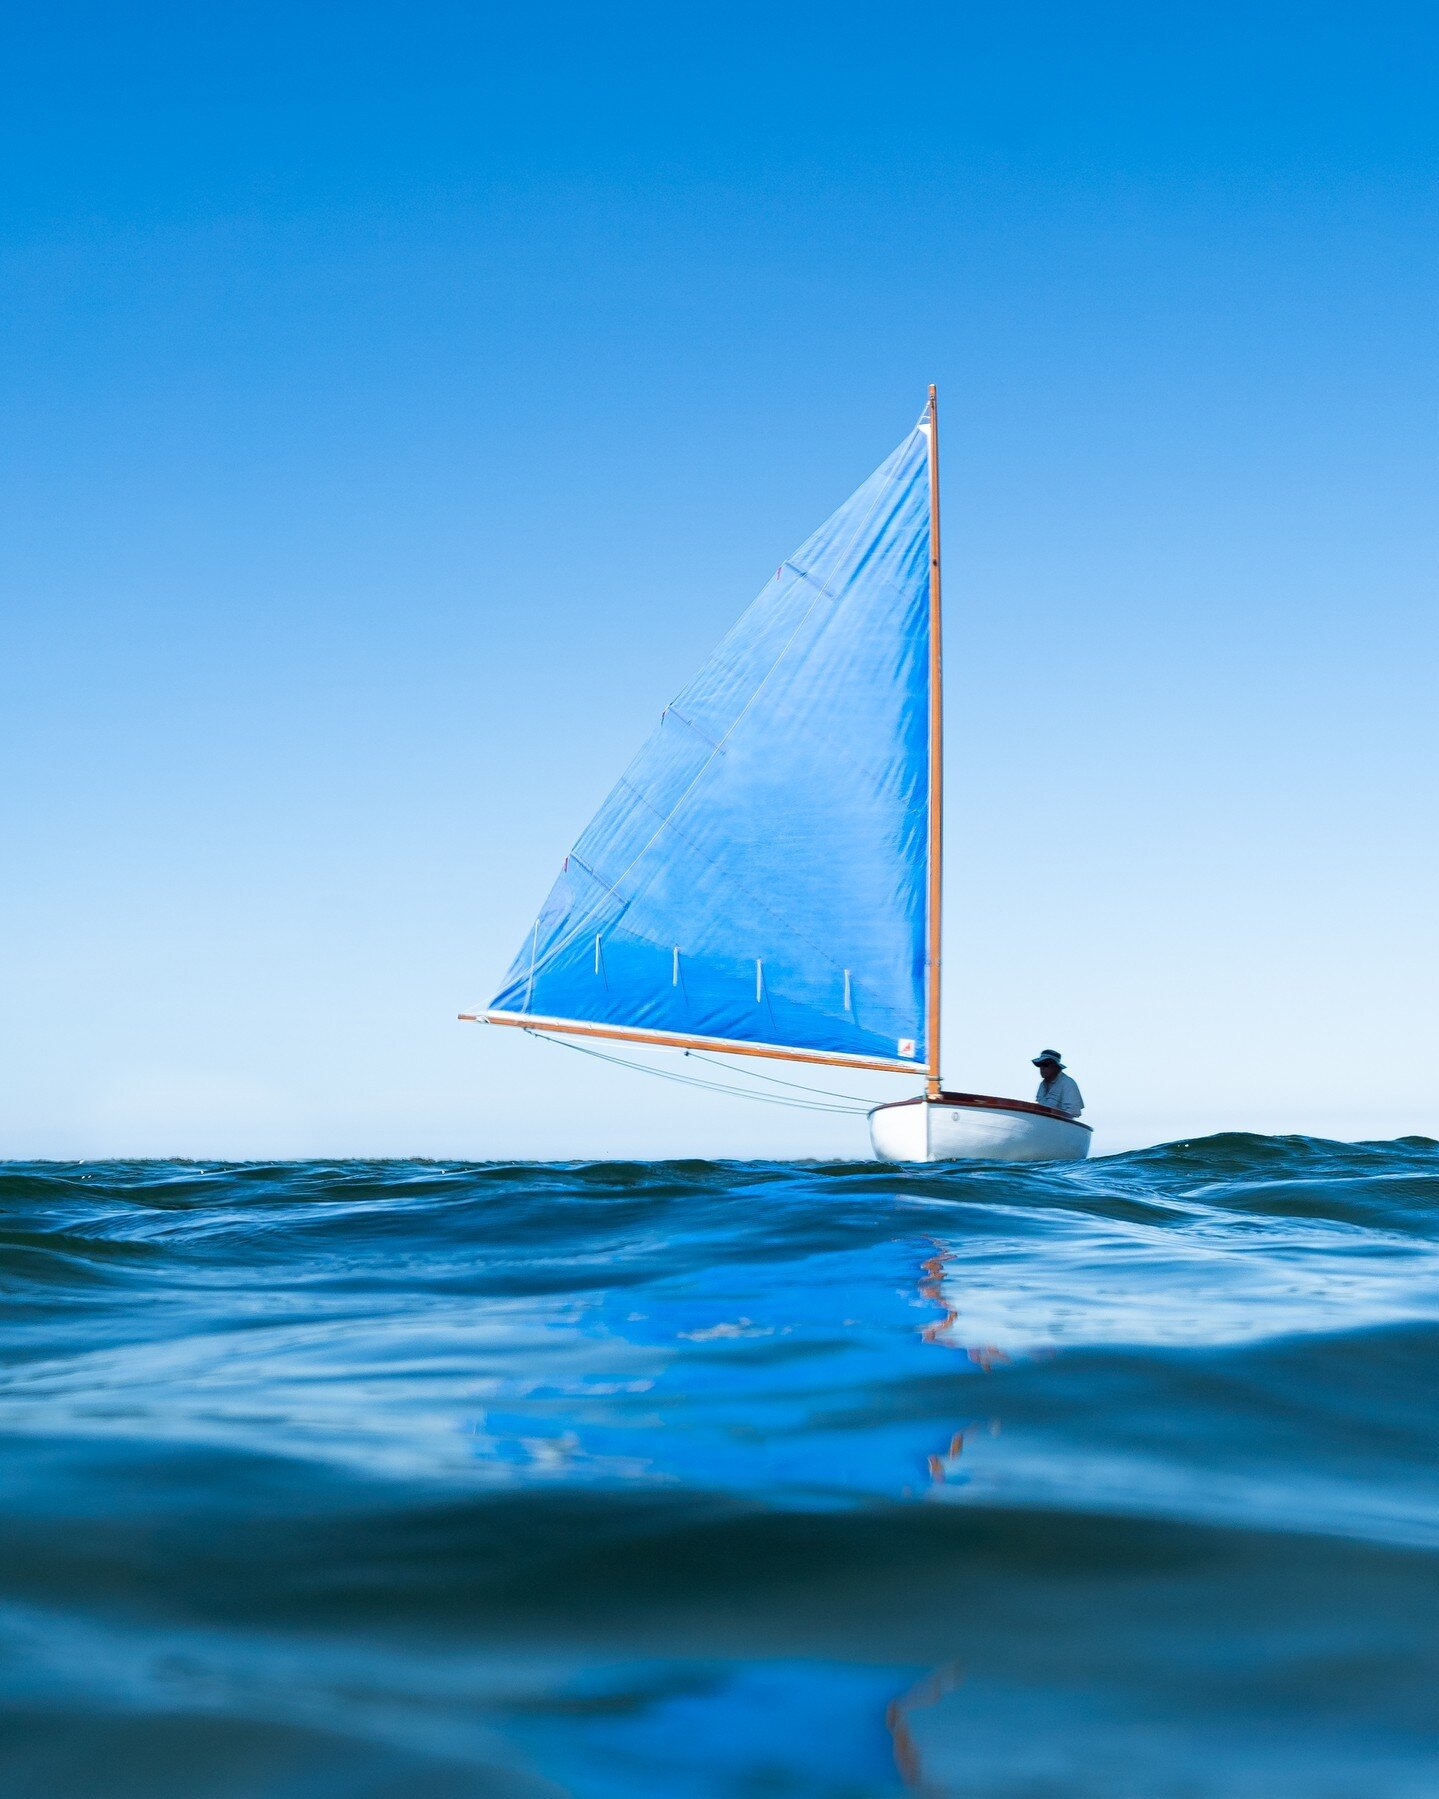 ​​SAILBOAT SCAVENGER

For 300 points, find a sailboat currently underway and upload a photo. The boat must be using its sails to propel itself through the water and not its engine. Upload your findings to our Climate Change Awareness Month Scavenger 